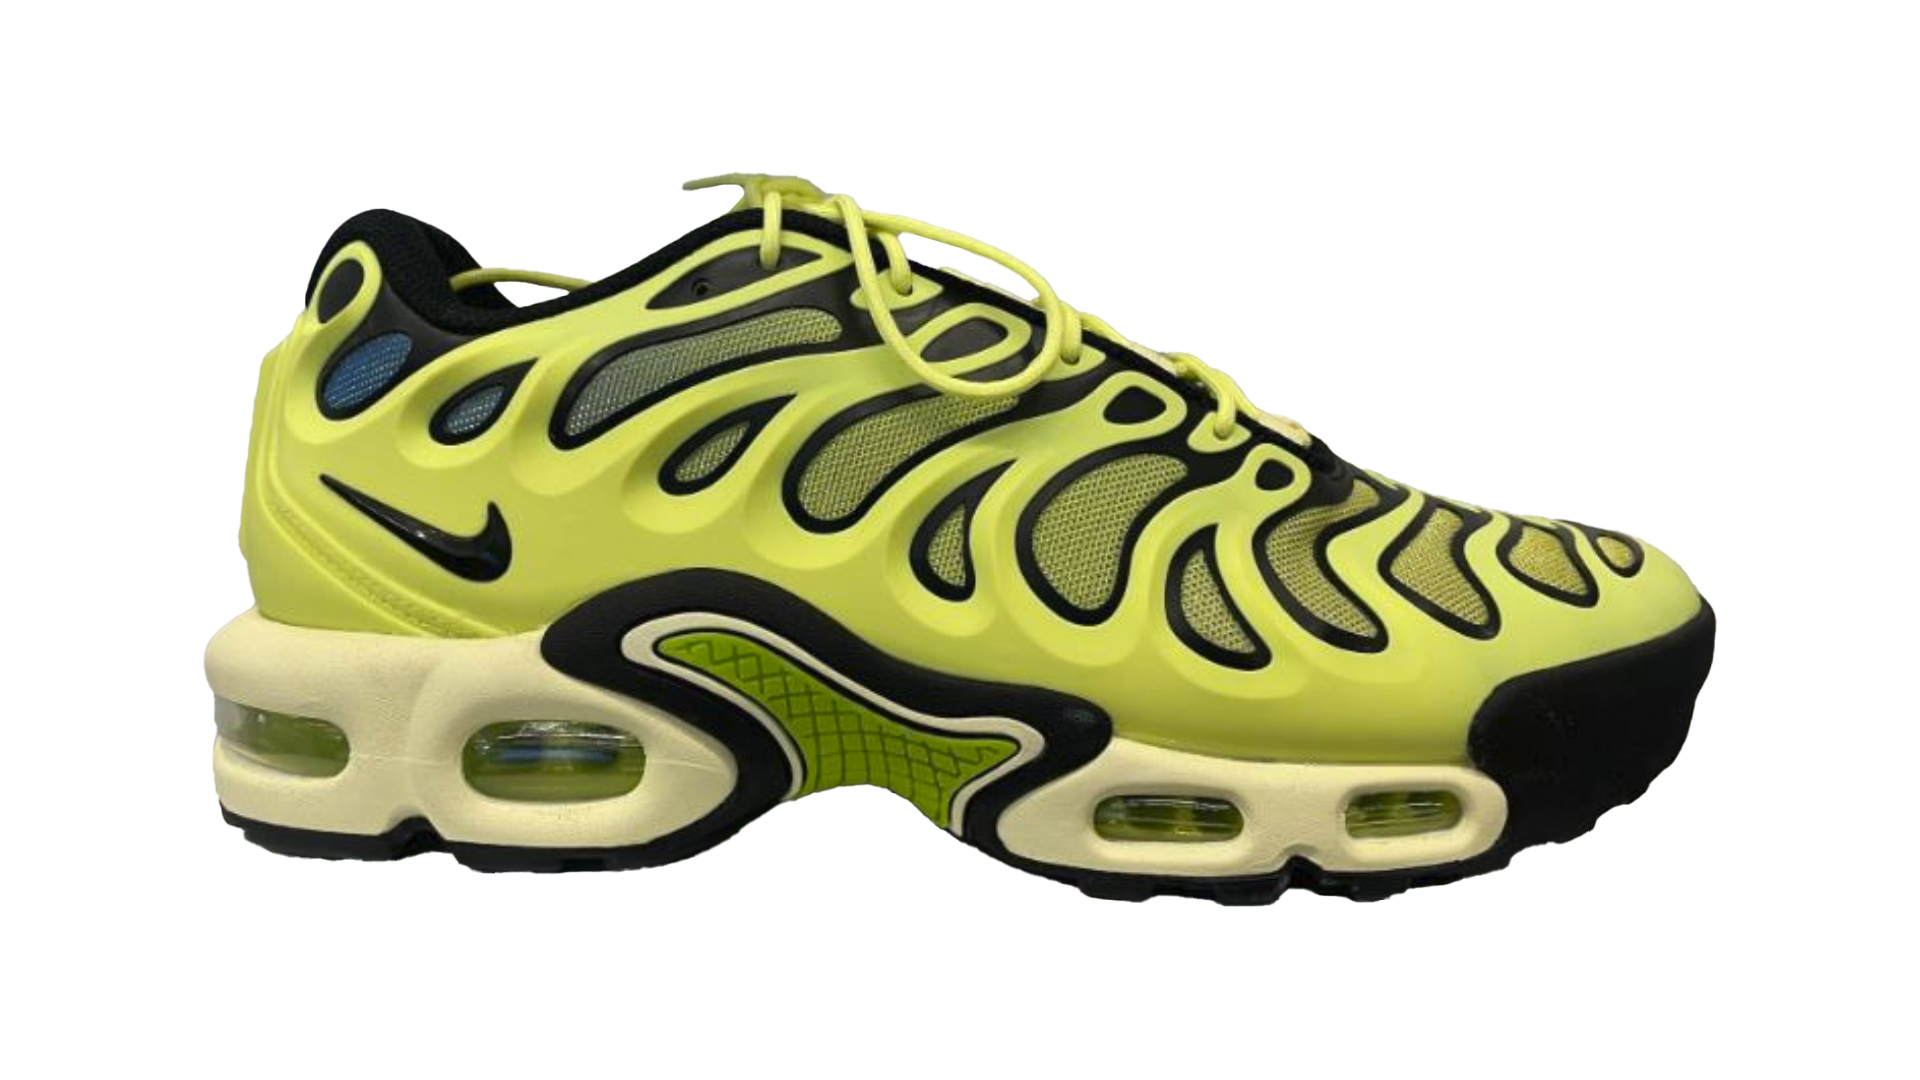 Nike Tuned, Shop Nike TNs Shoes Online